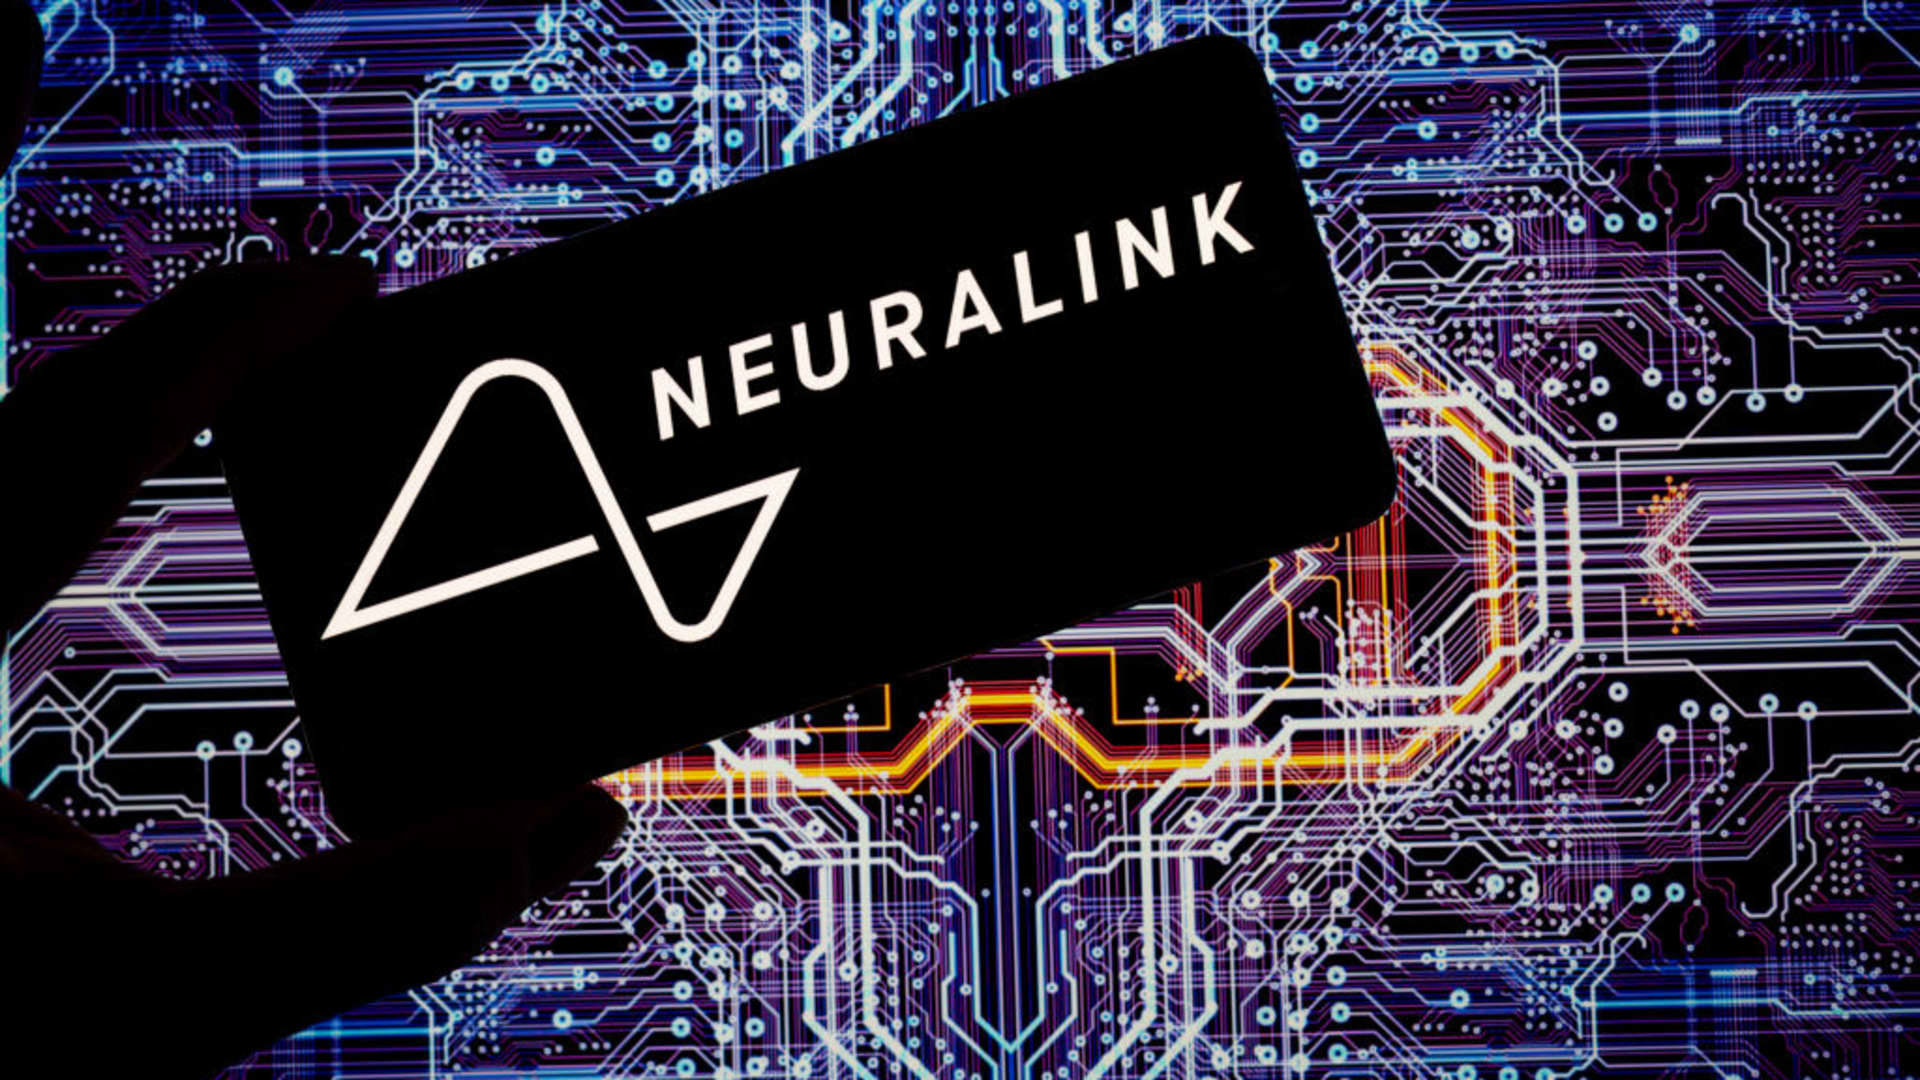 Elon Musk's startup Neuralink on Wednesday said part of its brain implant malfunctioned after it put the system in a human patient for the first 